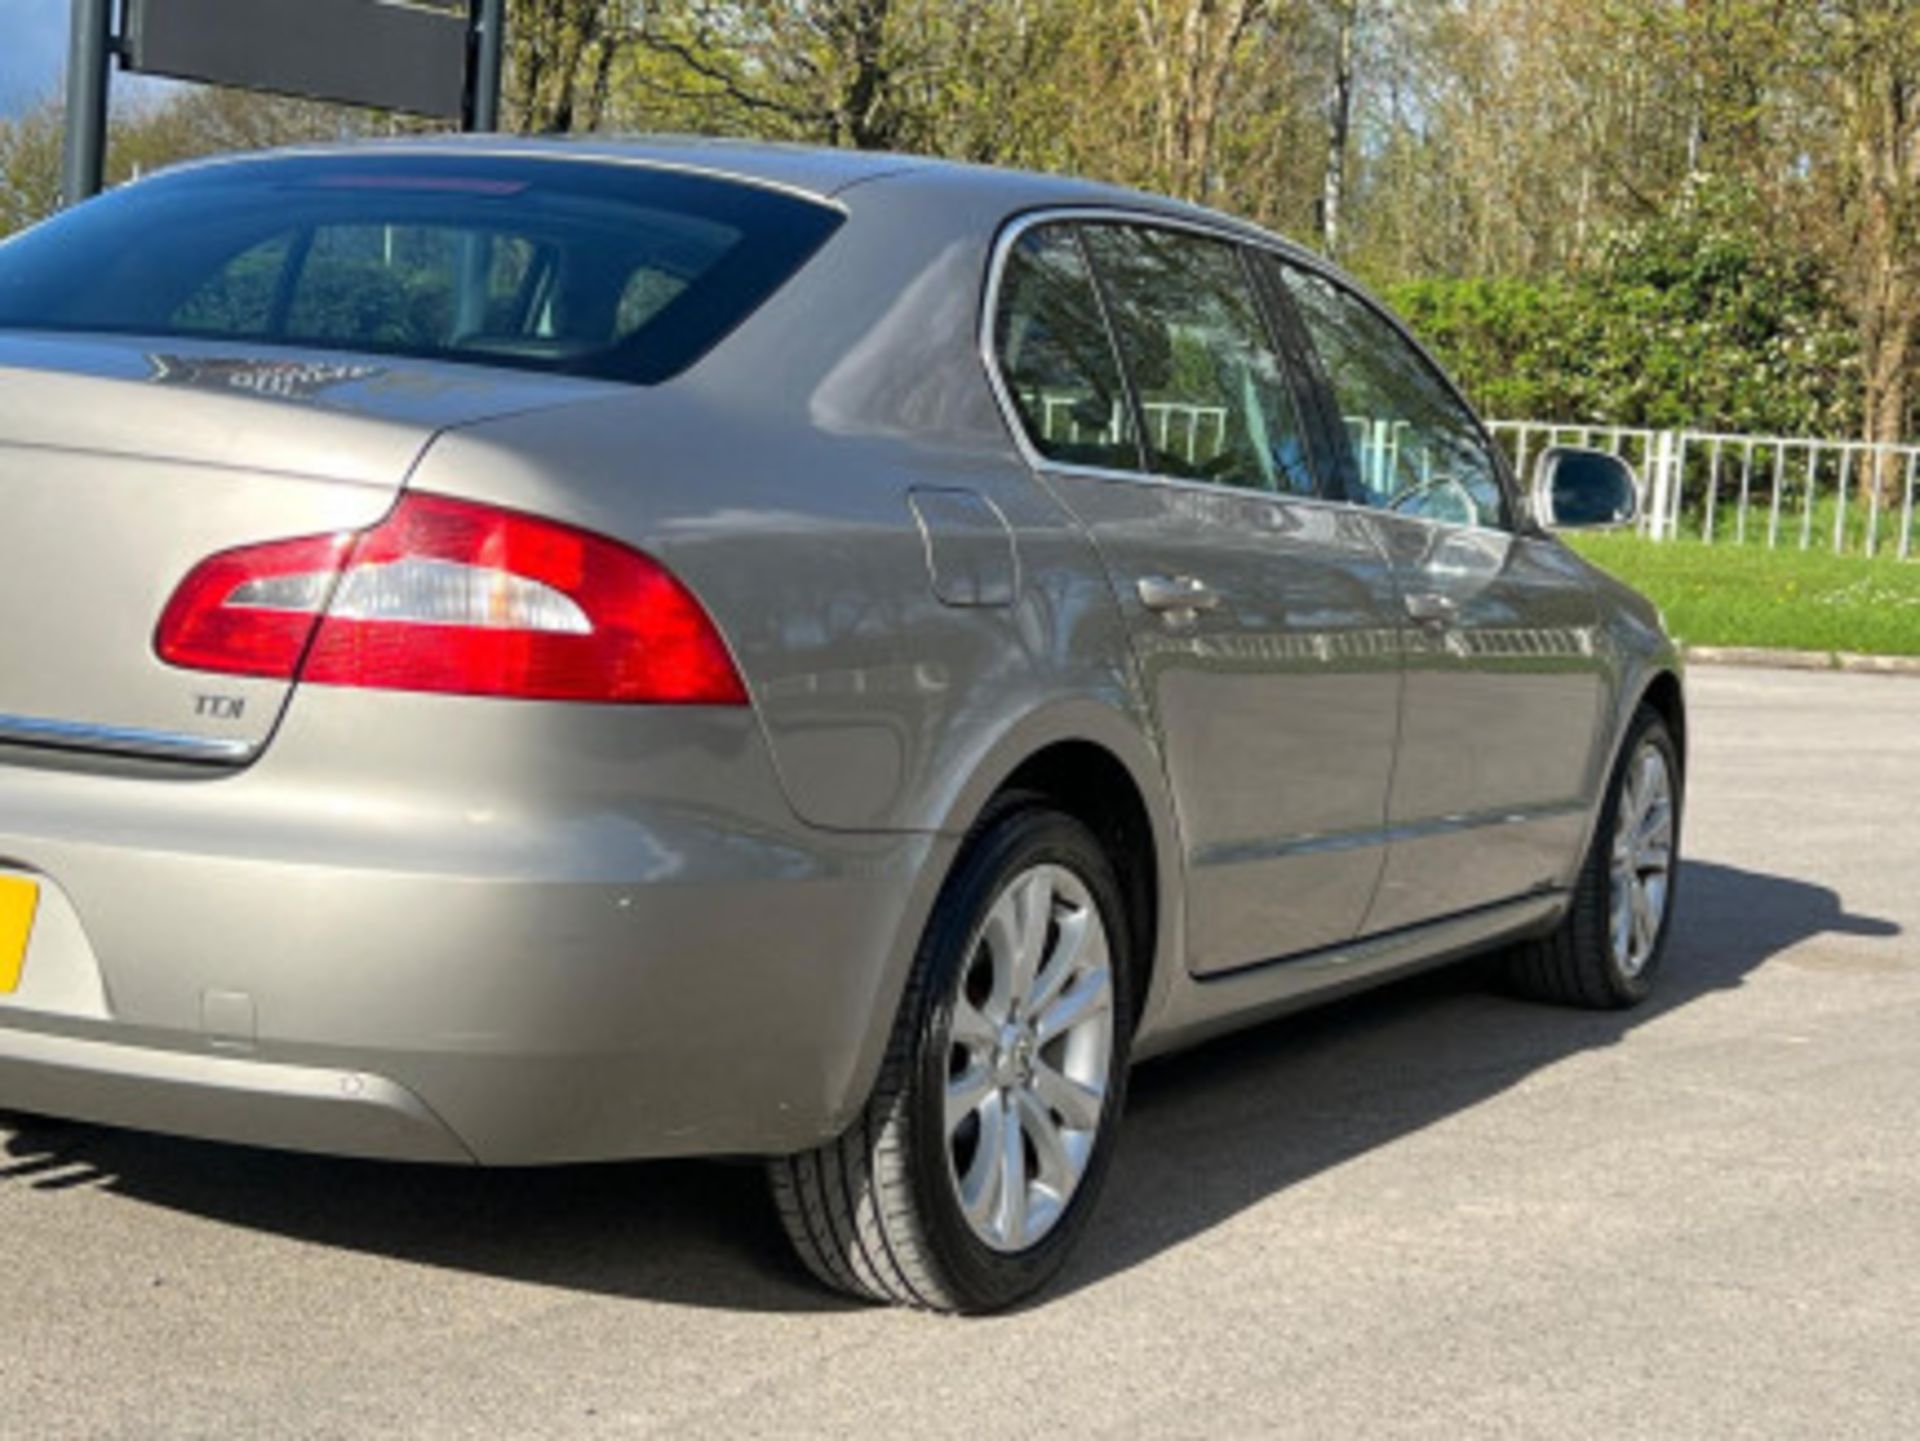 >>--NO VAT ON HAMMER--<<STYLISH AND RELIABLE SKODA SUPERB 1.6 TDI S GREENLINE II EURO 5 - Image 48 of 141